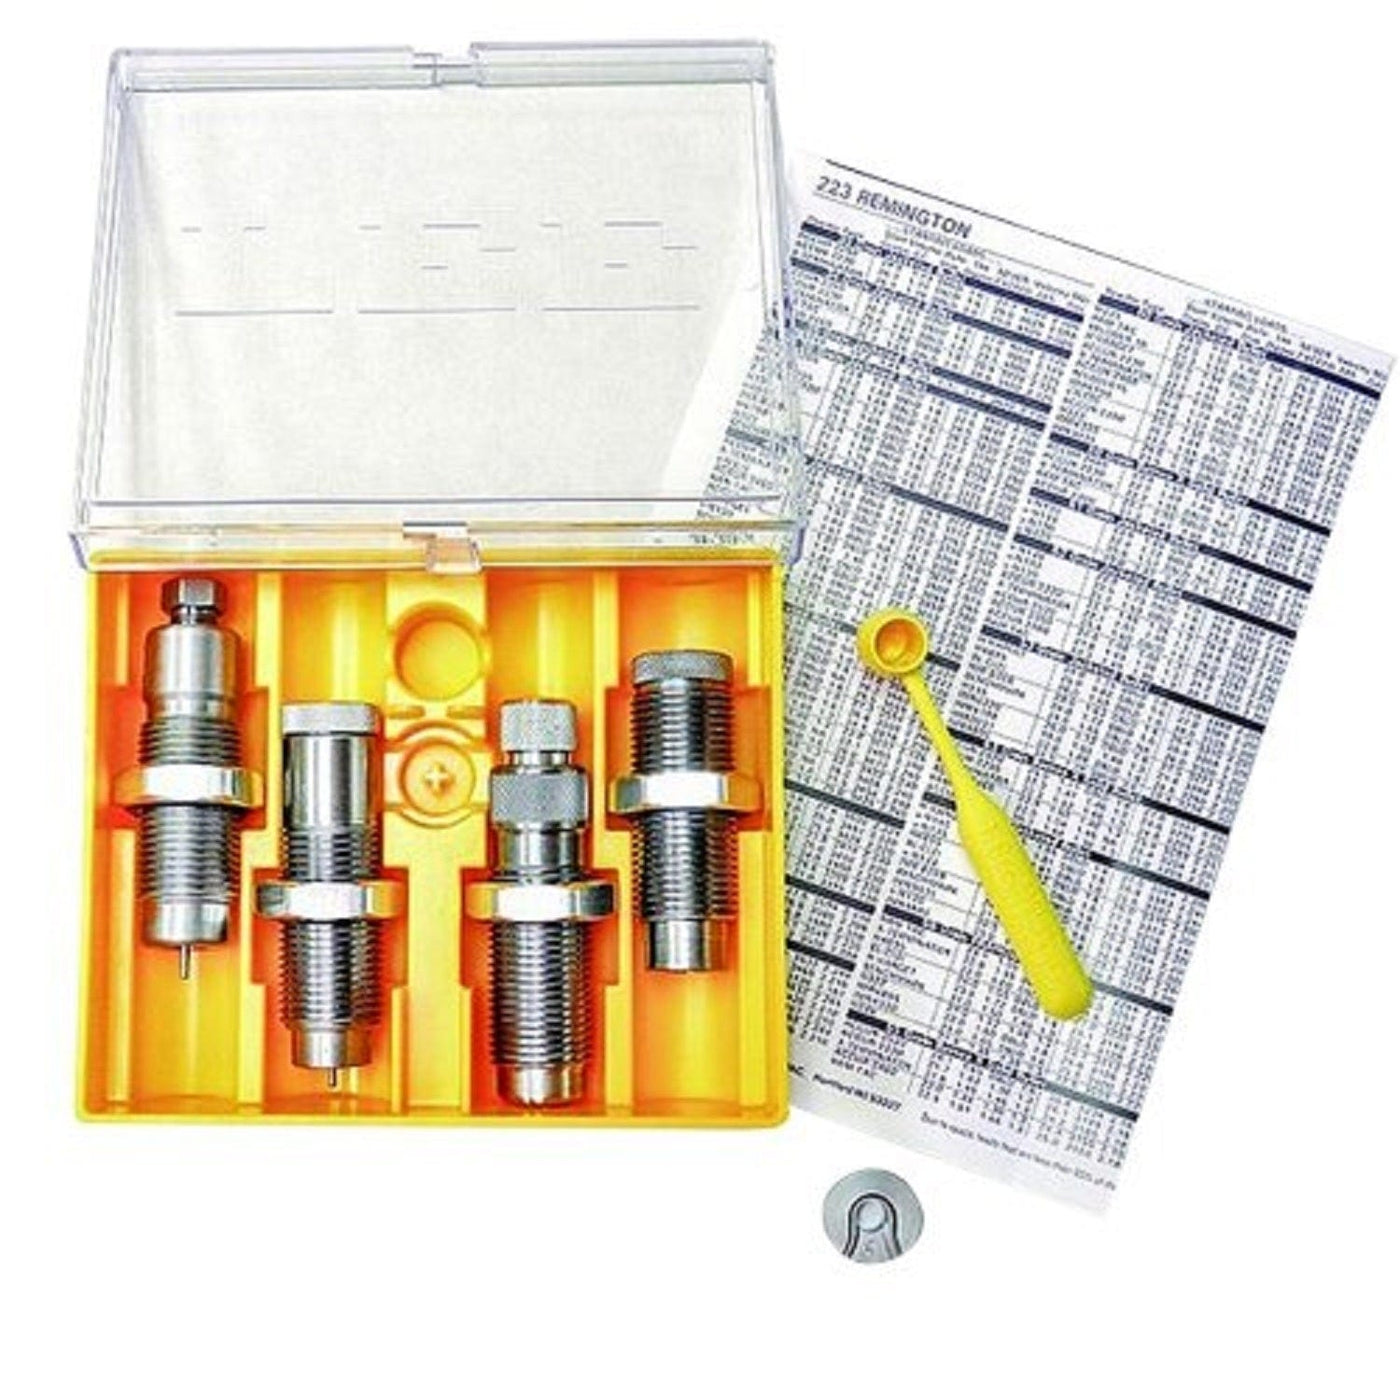 Lee Precision Lee Precision Reloading 308 WIN Ultimate Rifle Die Set Shooting